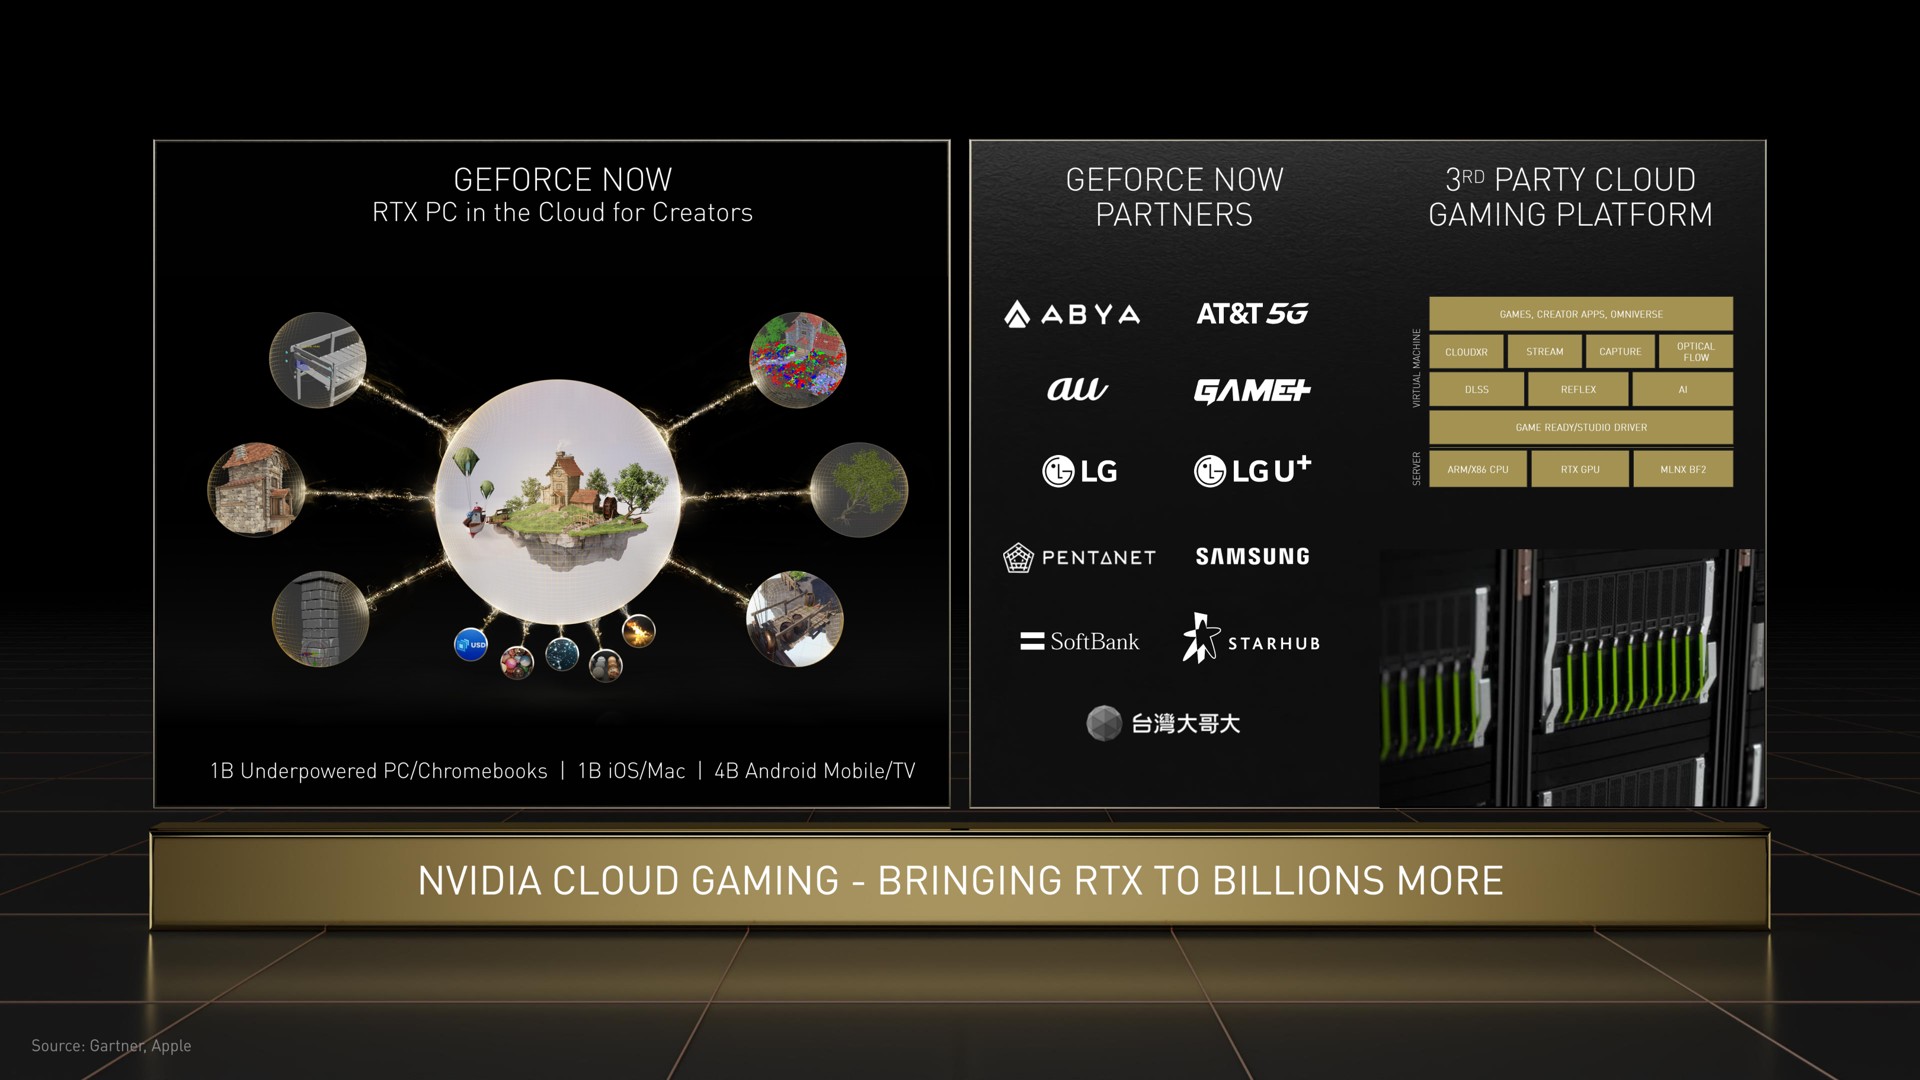 now partners party cloud gaming platform a be as so | NVIDIA